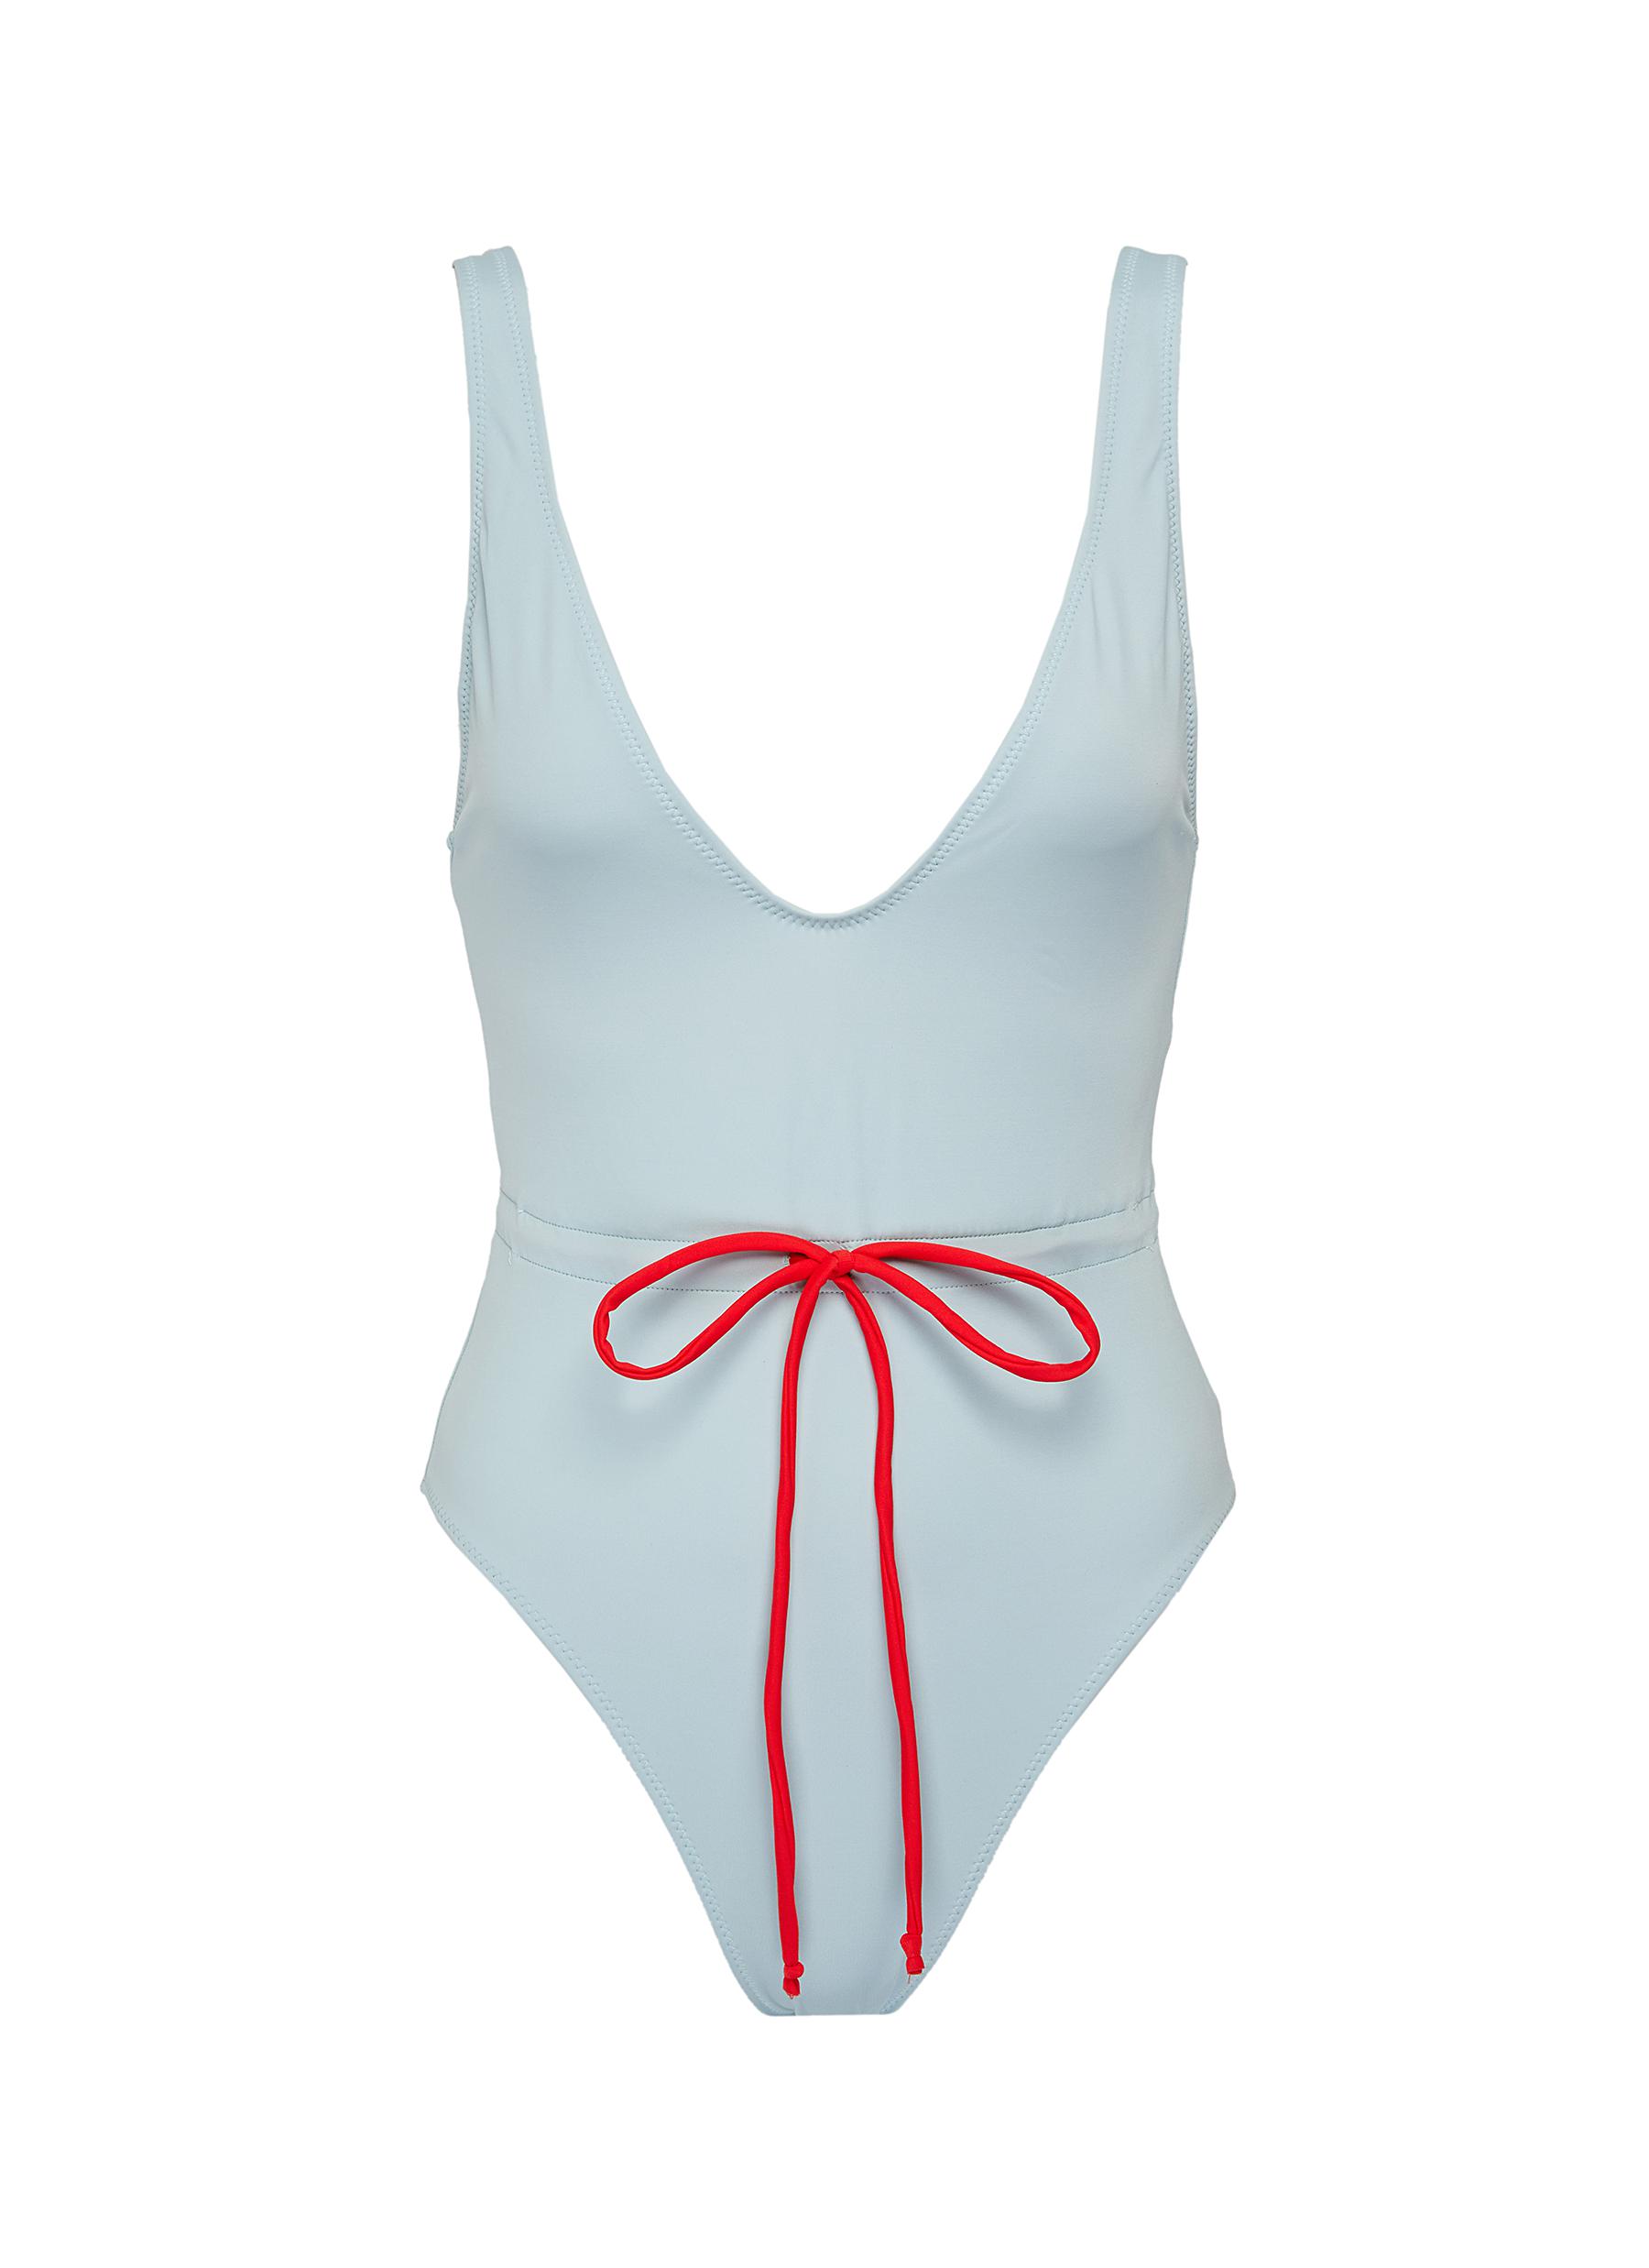 The Michelle Tie one-piece swimsuit by Solid & Striped